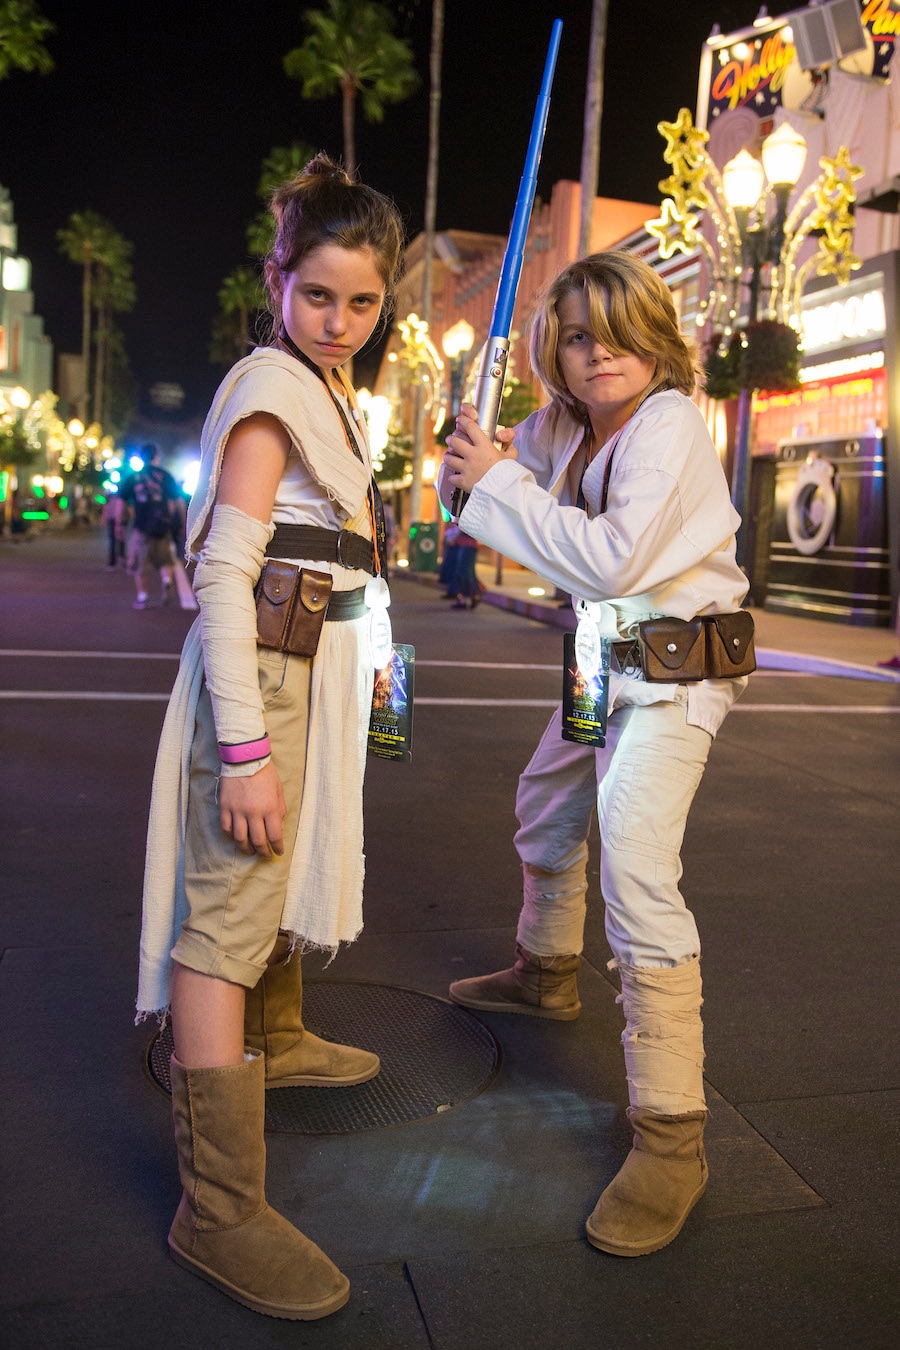 Guests Celebrate The Opening Of 'Star Wars: The Force Awakens' at Disney's Hollywood Studios